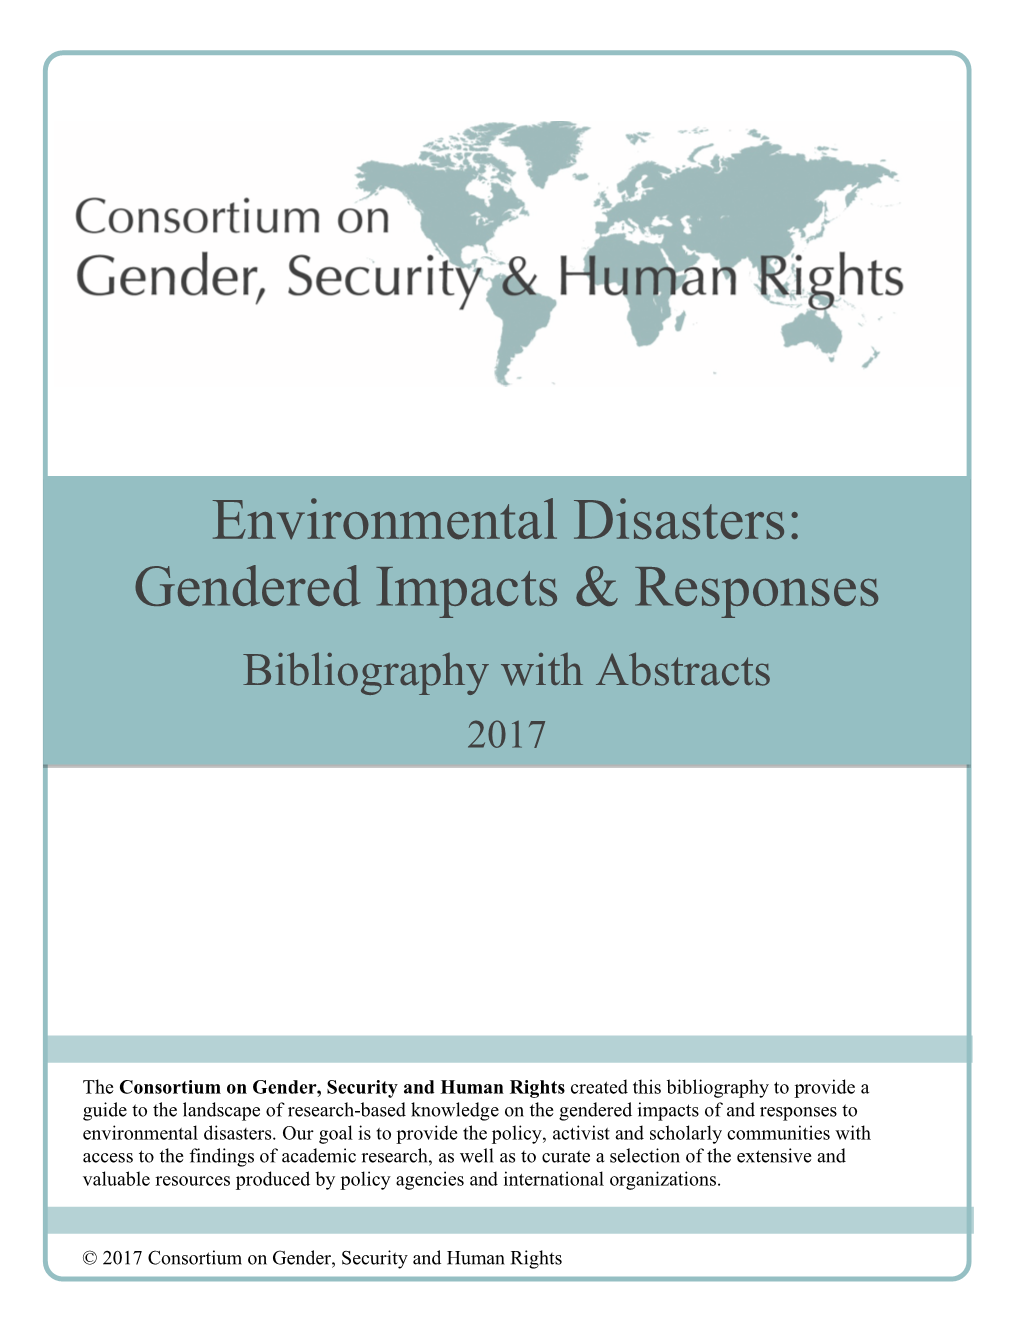 Environmental Disasters: Gendered Impacts & Responses